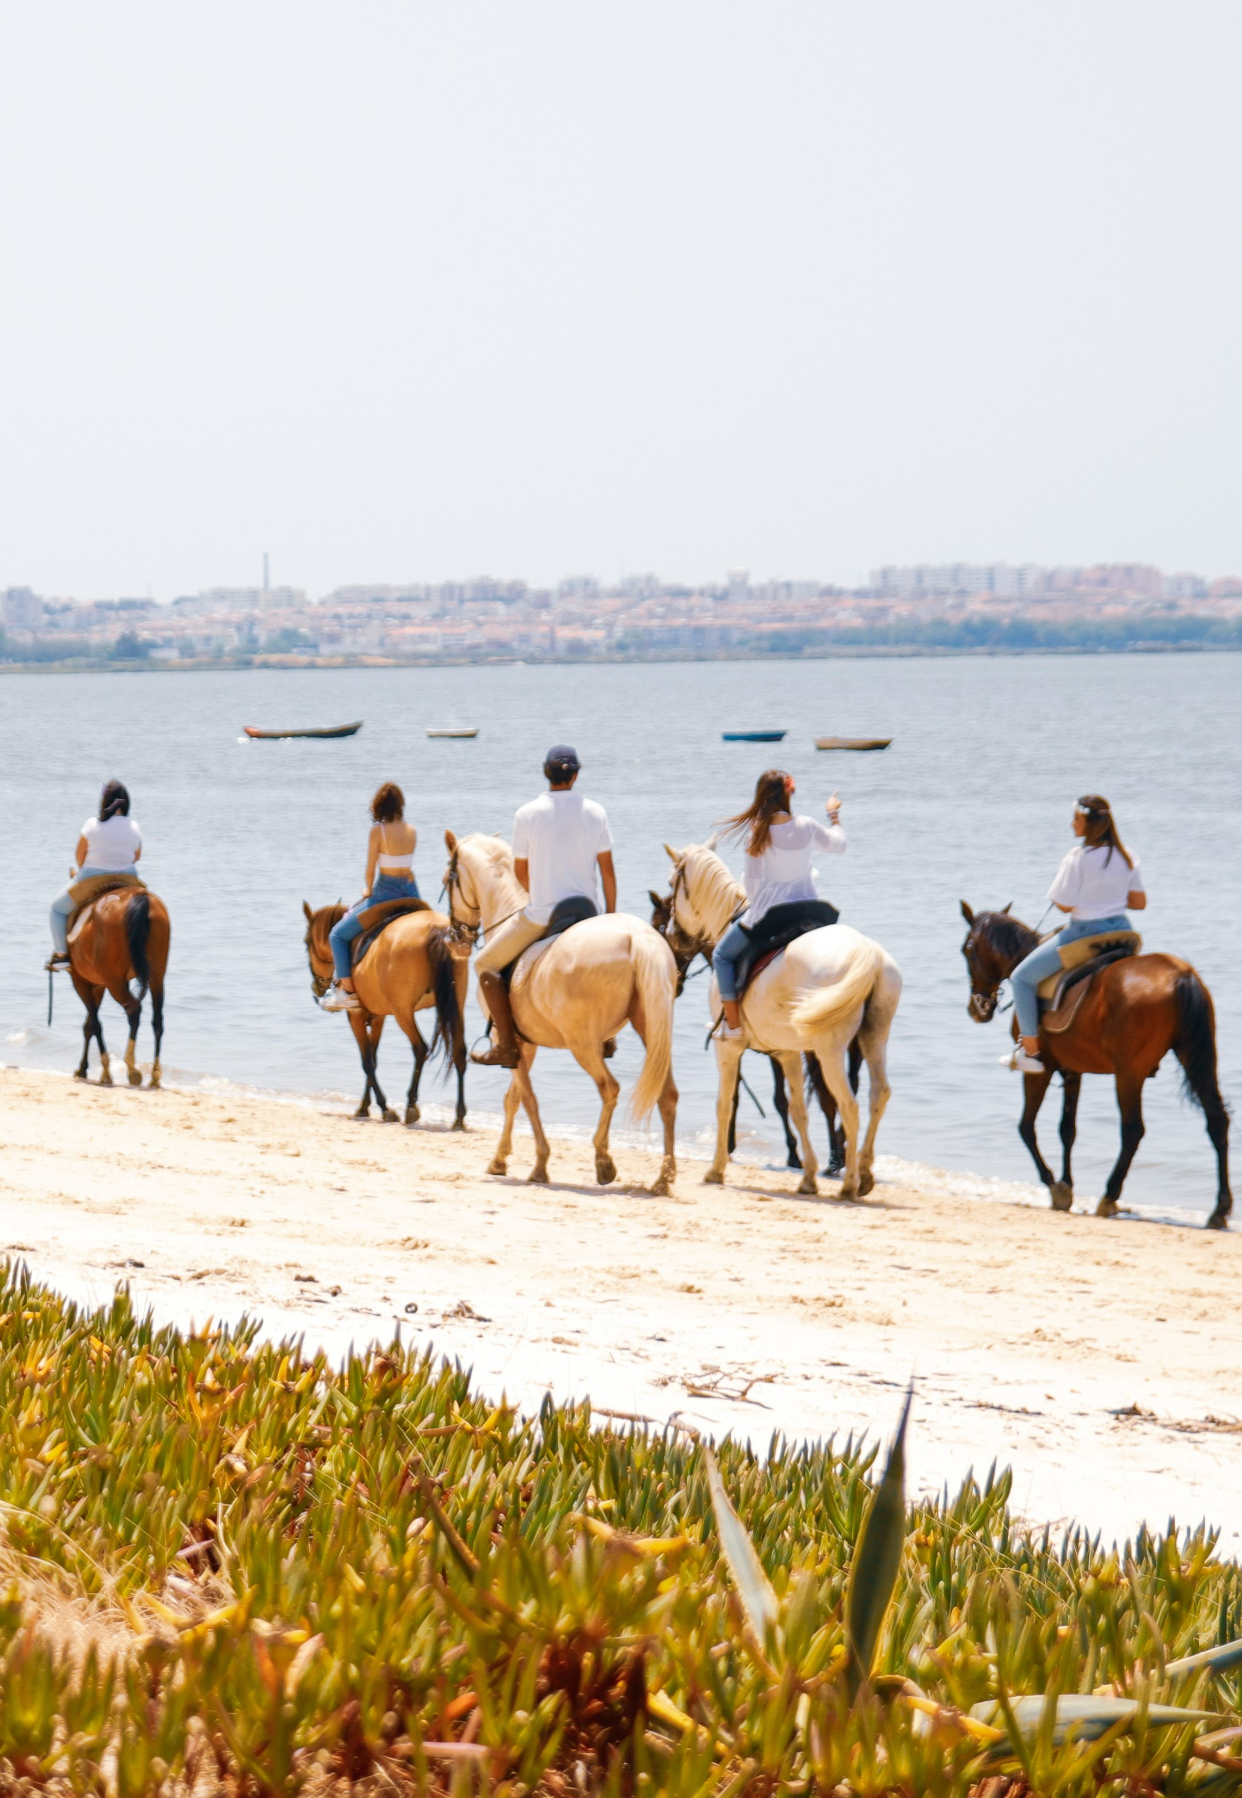 Horseback Riding on the Beach • 1h 30min • From 12 years old